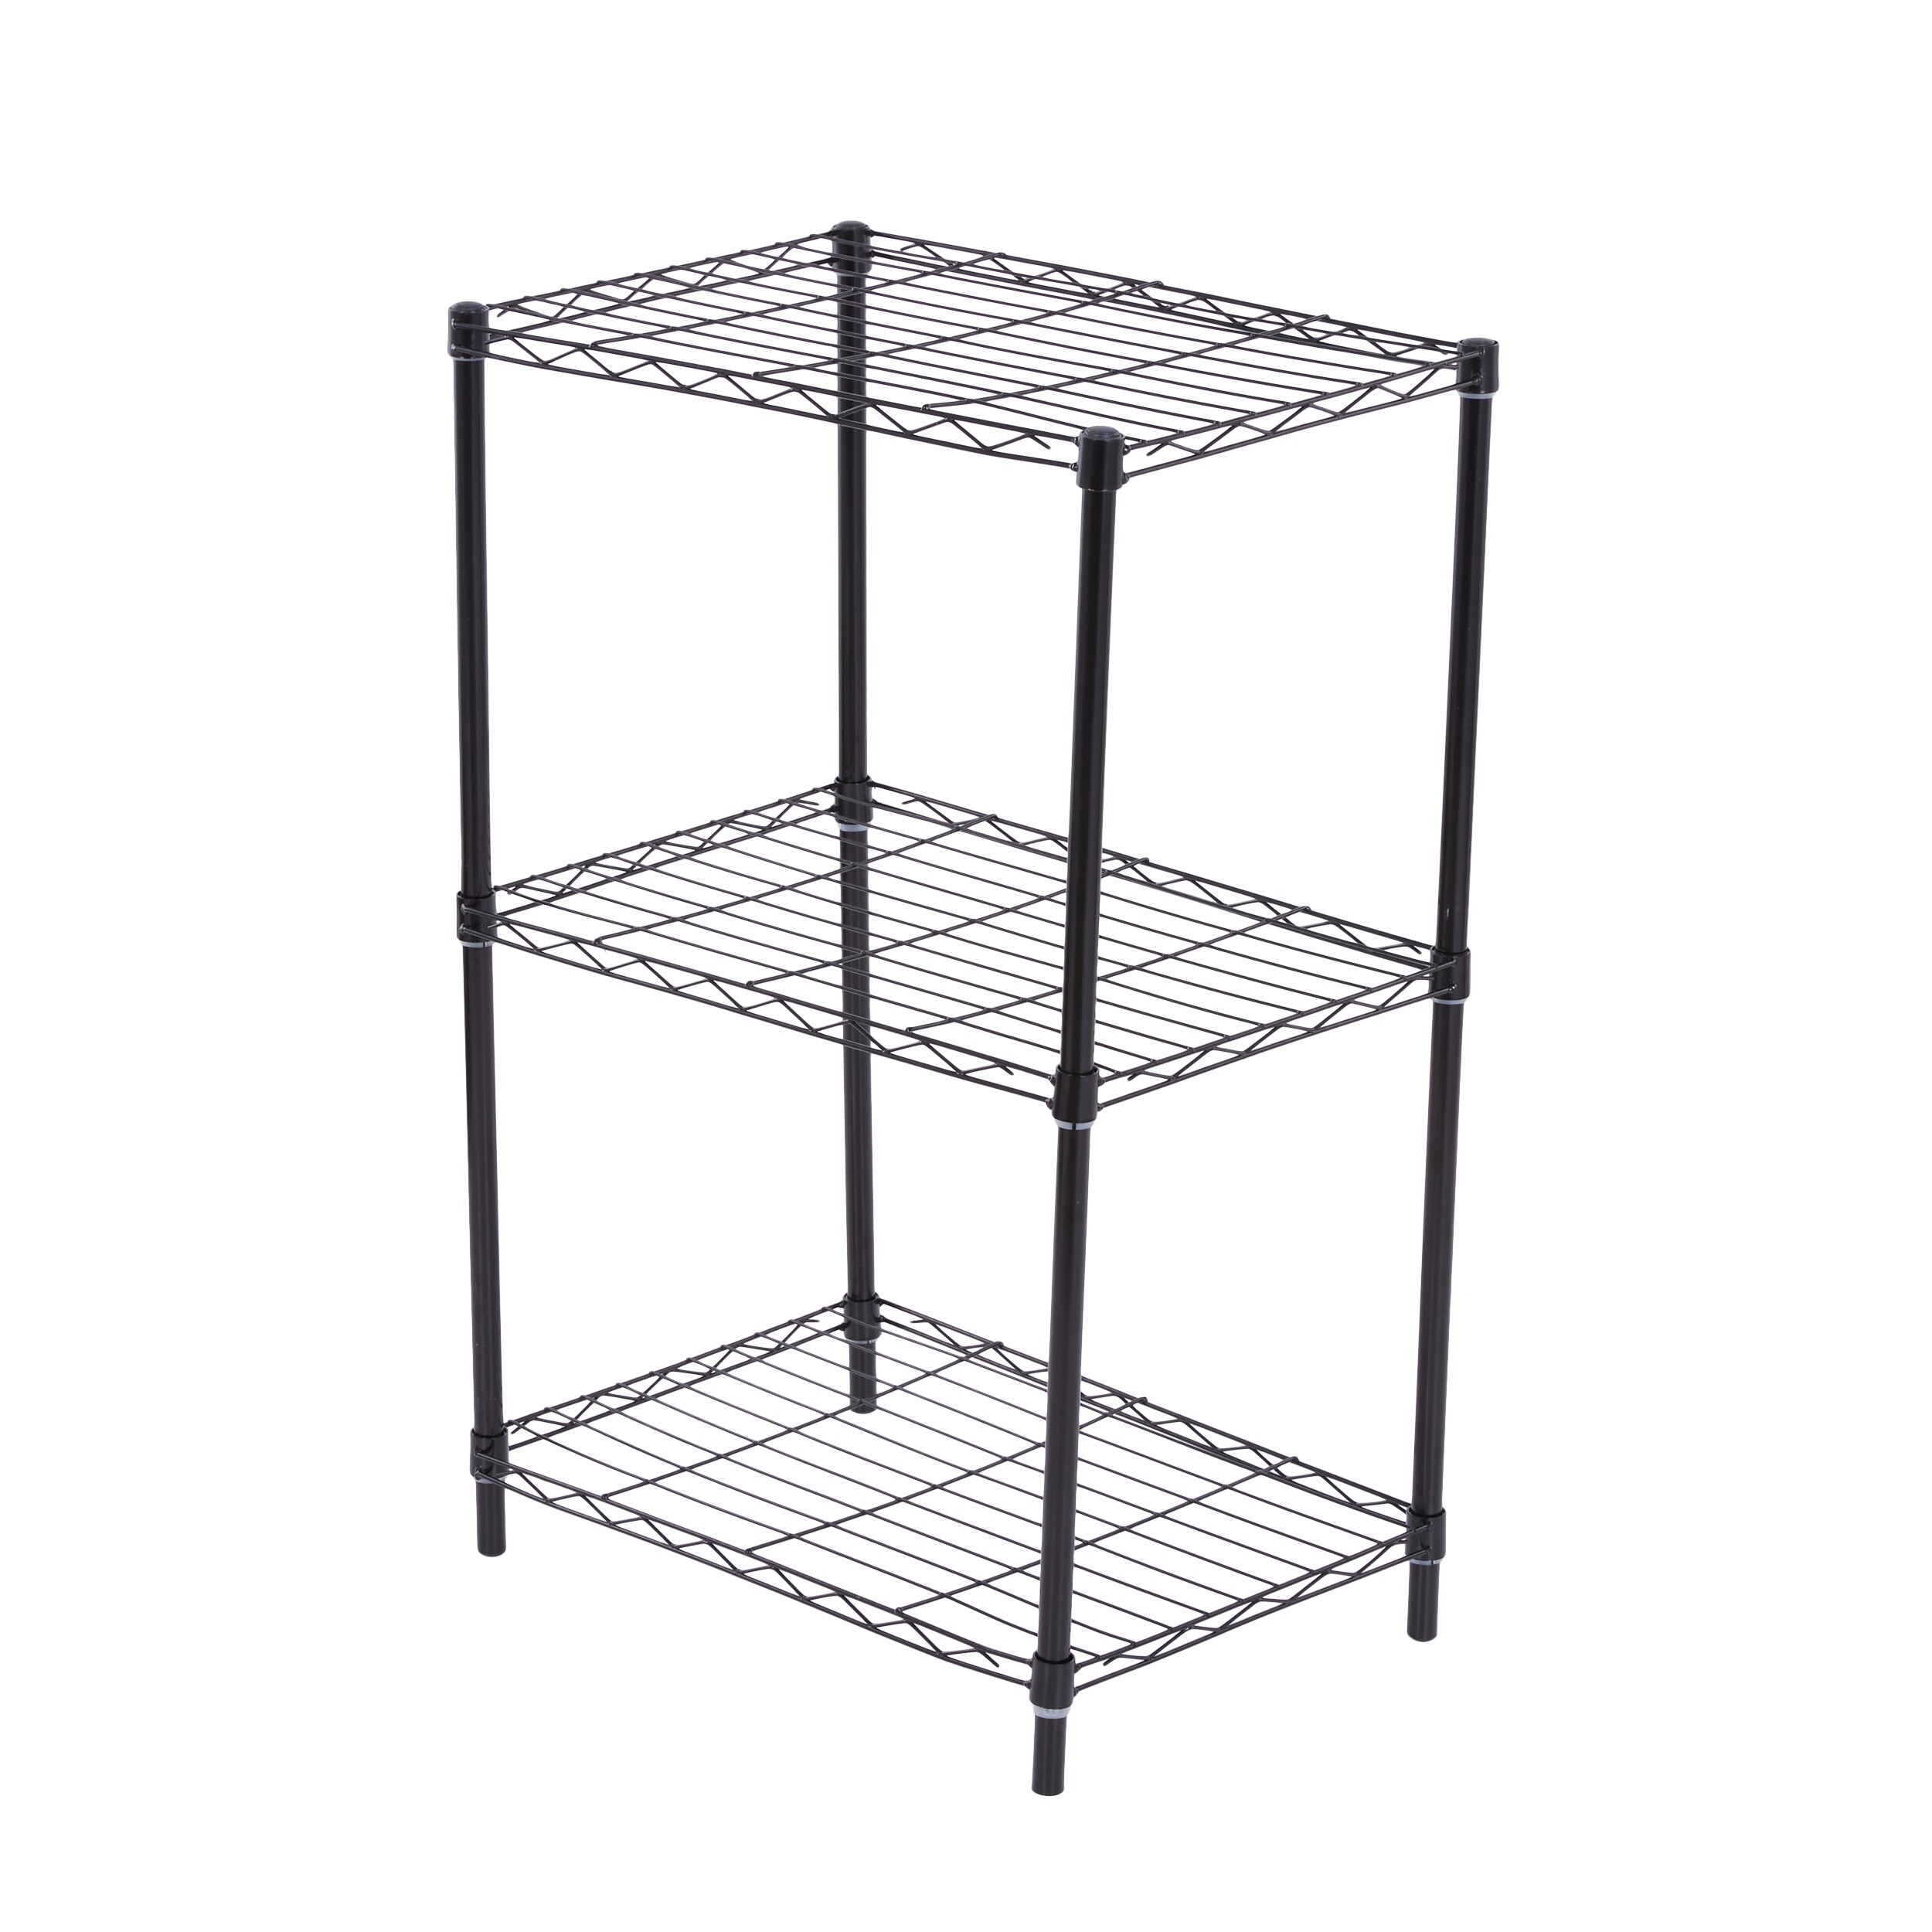 Dlewmsyic 3-Tier Small Wire Shelving Unit, Metal Shelf Height Adjustable  23Lx13.2Wx30.2H 450lbs for Kitchen Pantry Office Rack, Black Storage Shelves